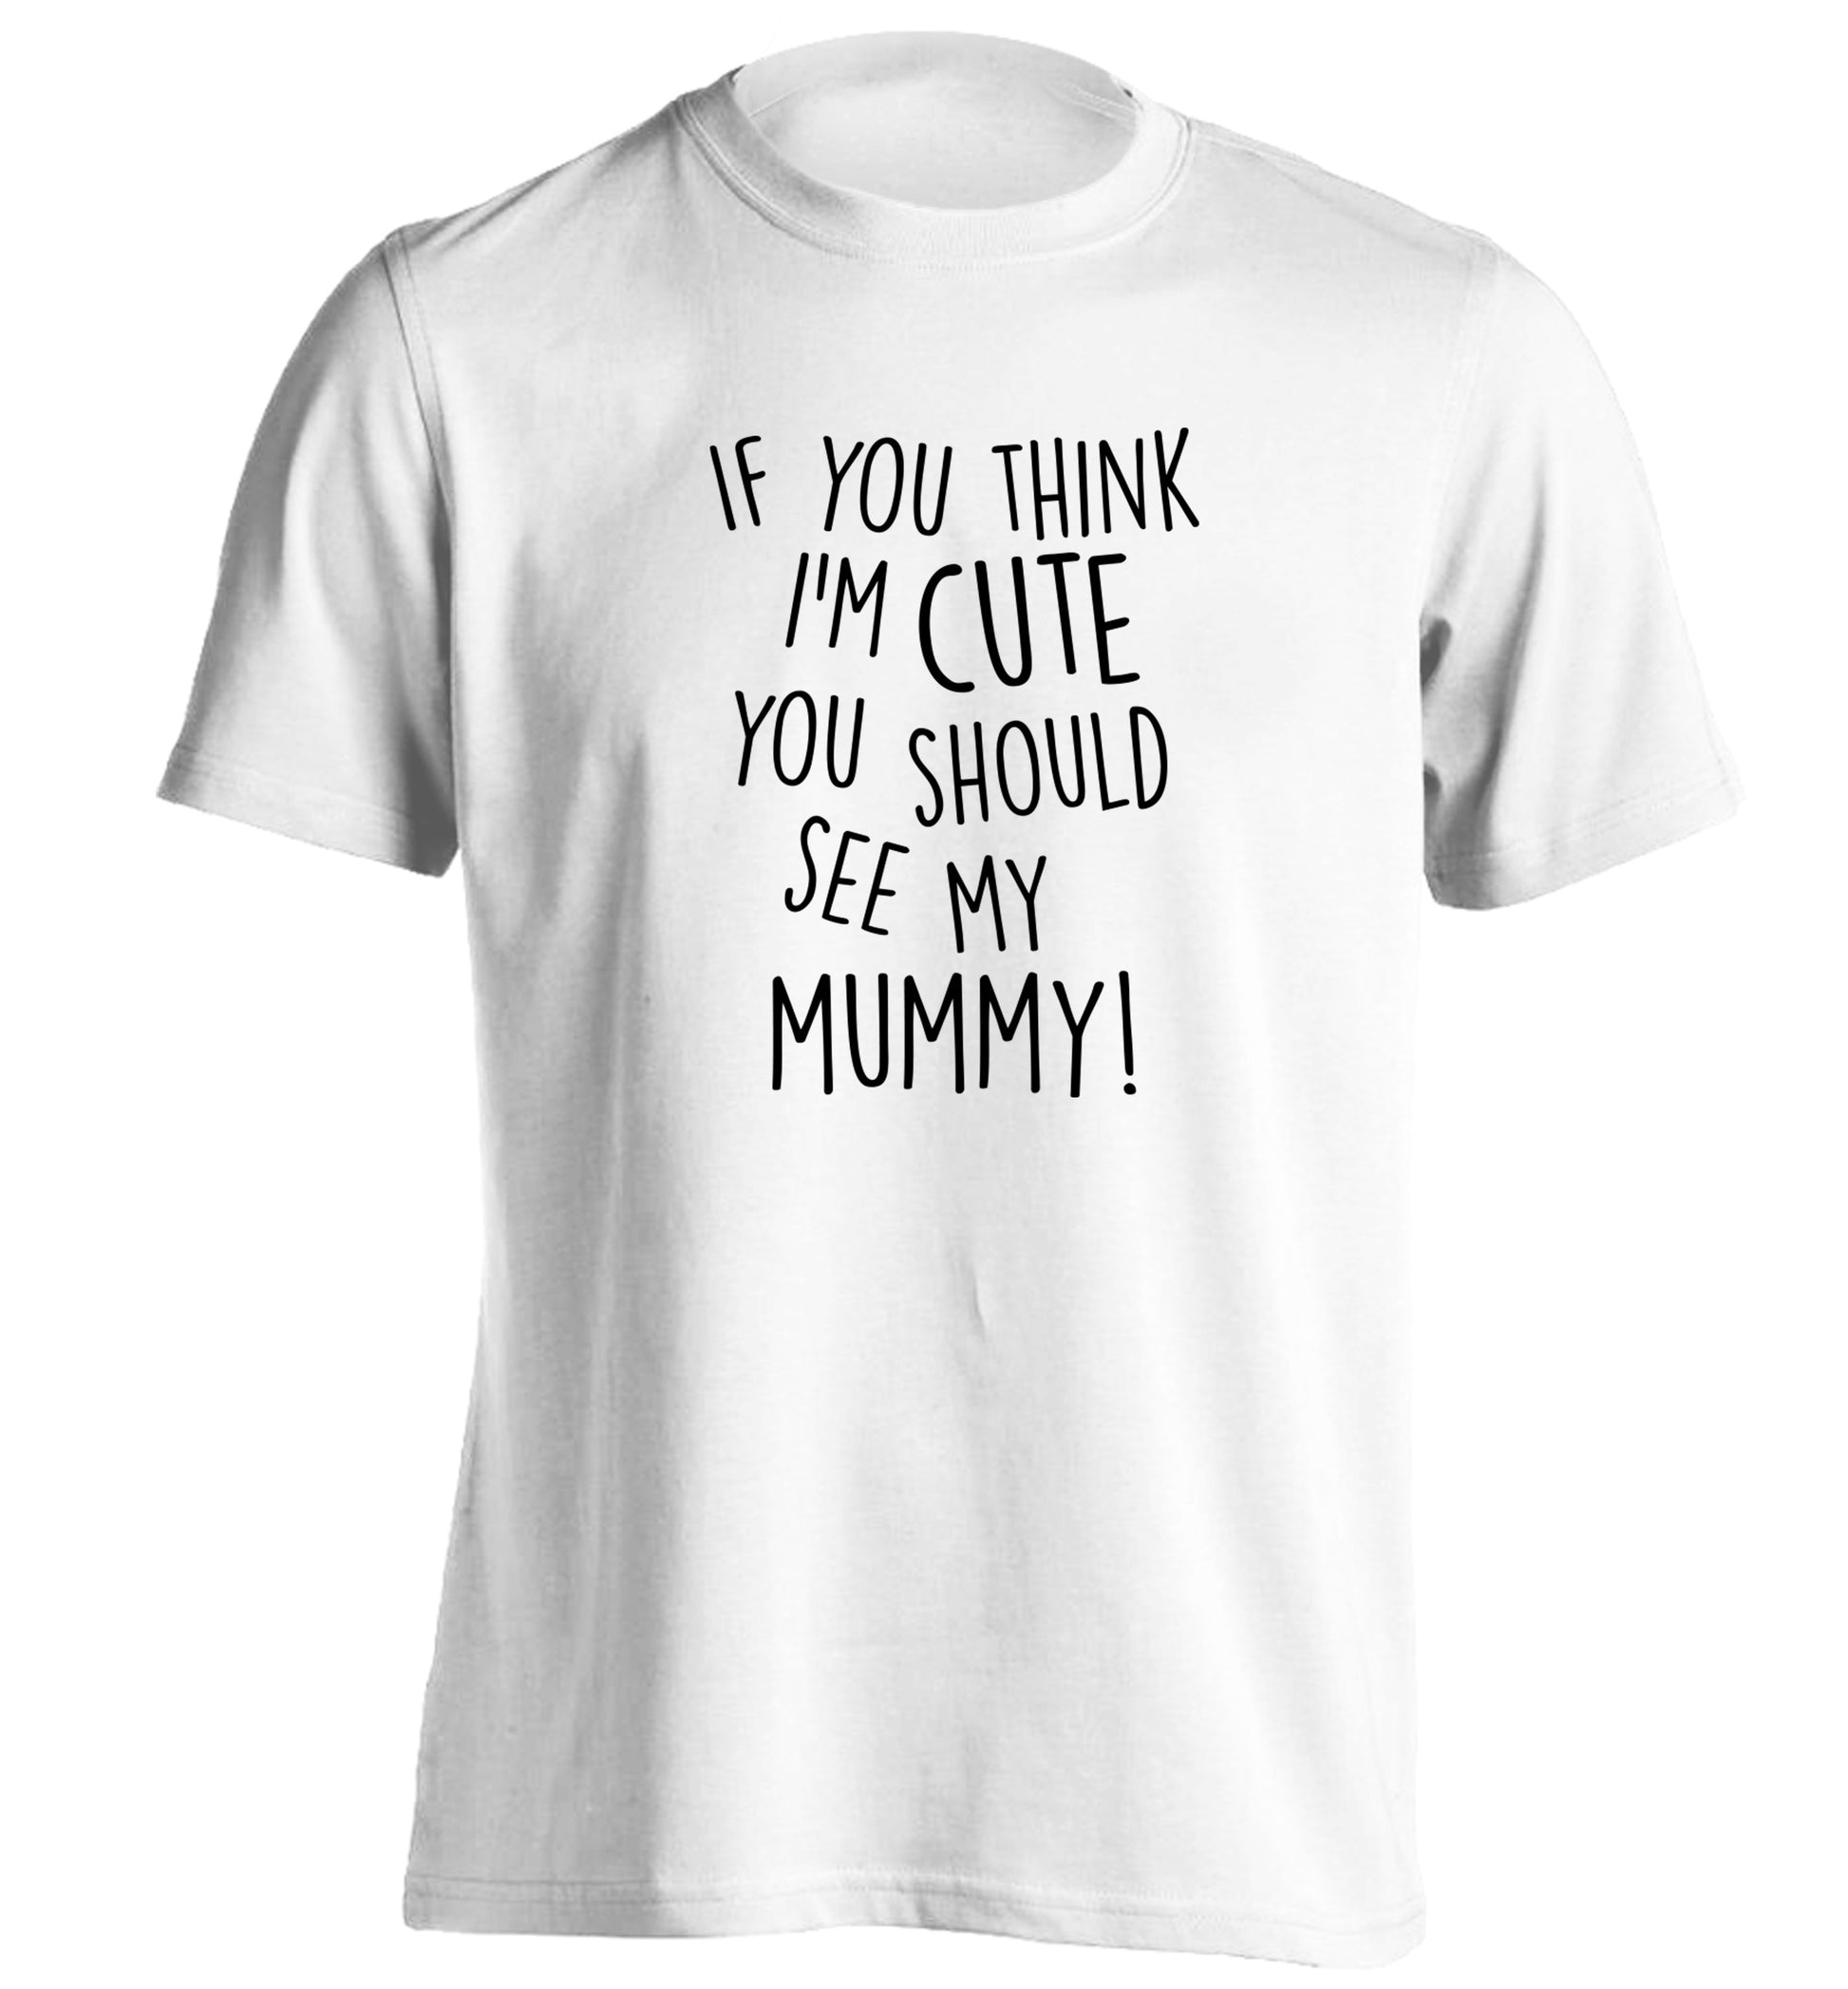 If you think I'm cute you should see my mummy adults unisex white Tshirt 2XL